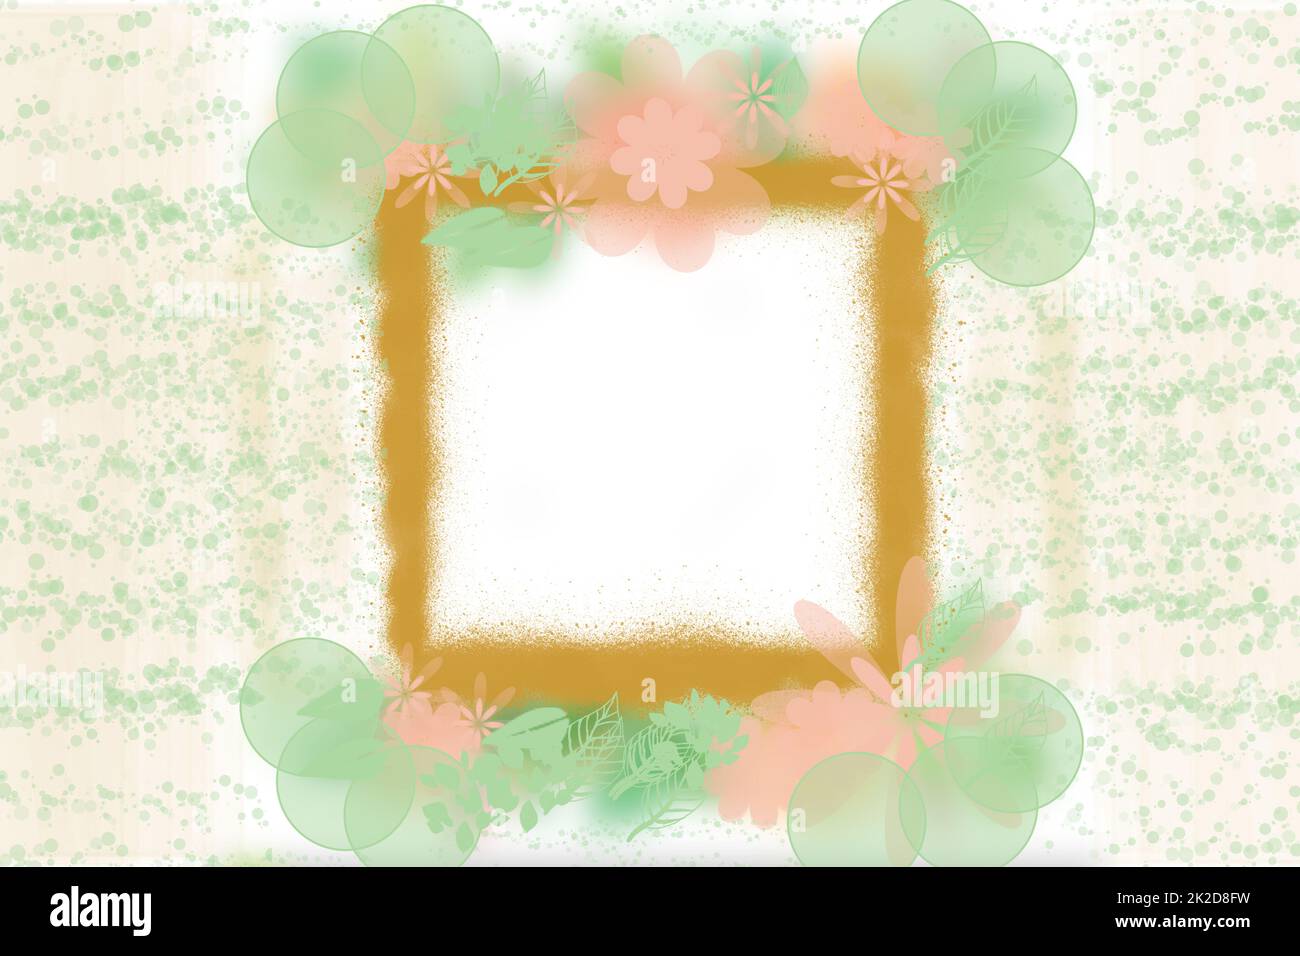 Greeting card template. Abstract festive light green pink Happy spring greeting card with flowers and leaves. Mothers day, valentine, wedding or other holidays.Frame with space. Stock Photo